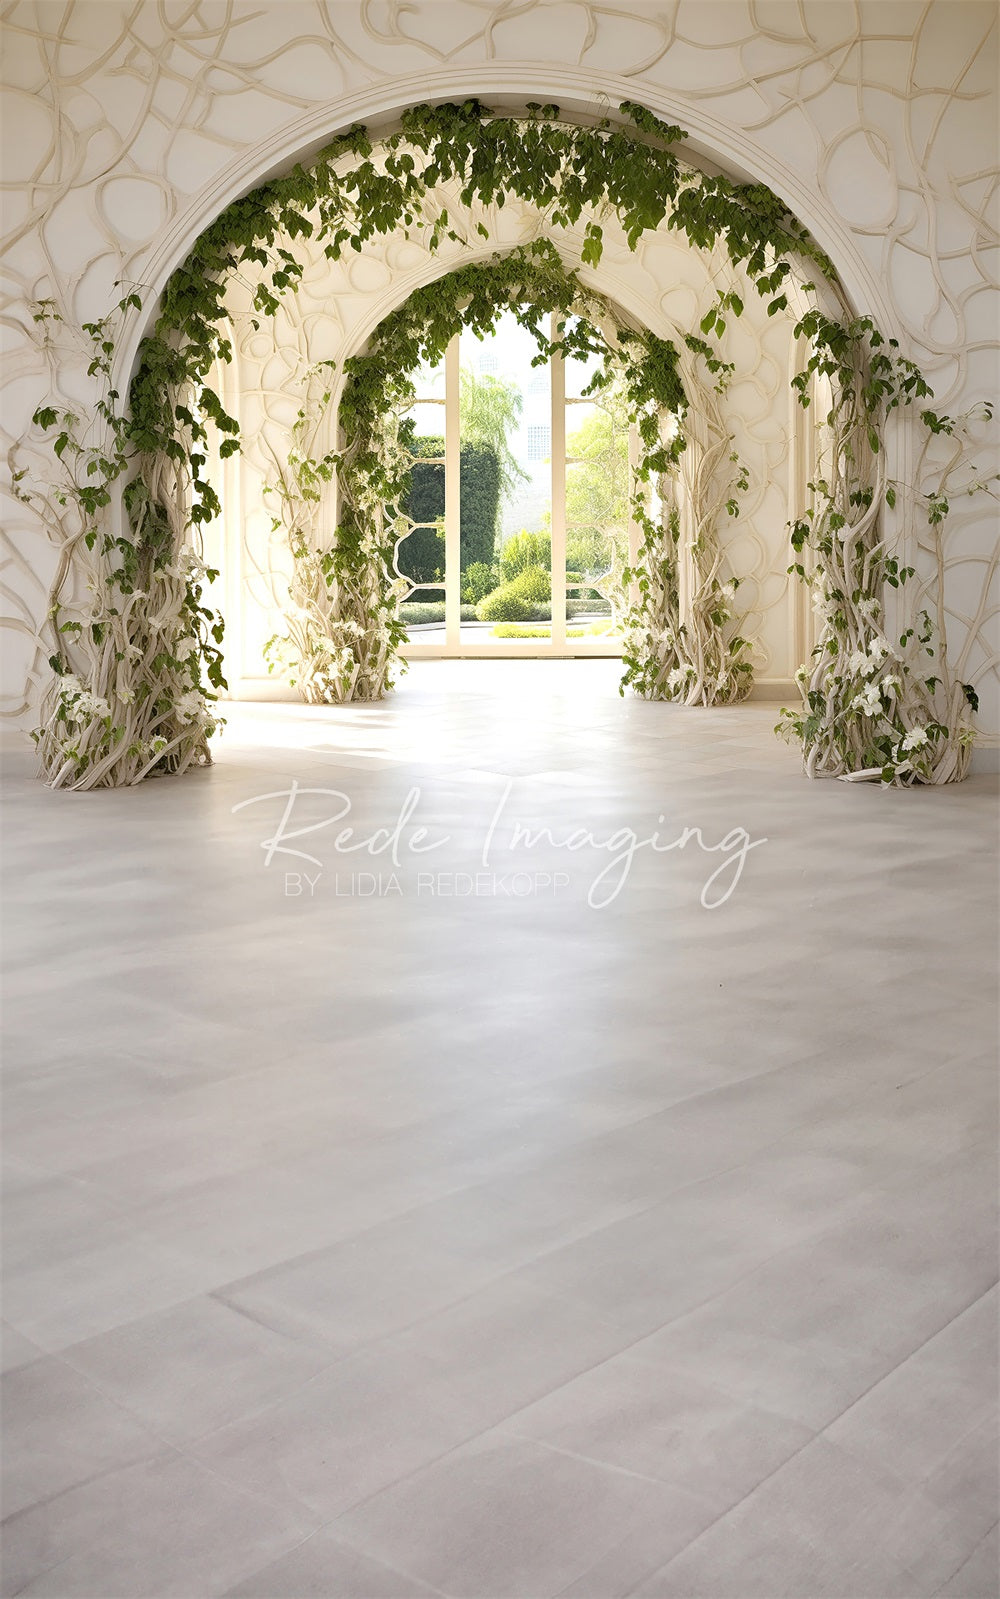 Kate Sweep Summer Green Plants White Indoor Arch Backdrop Designed by Lidia Redekopp